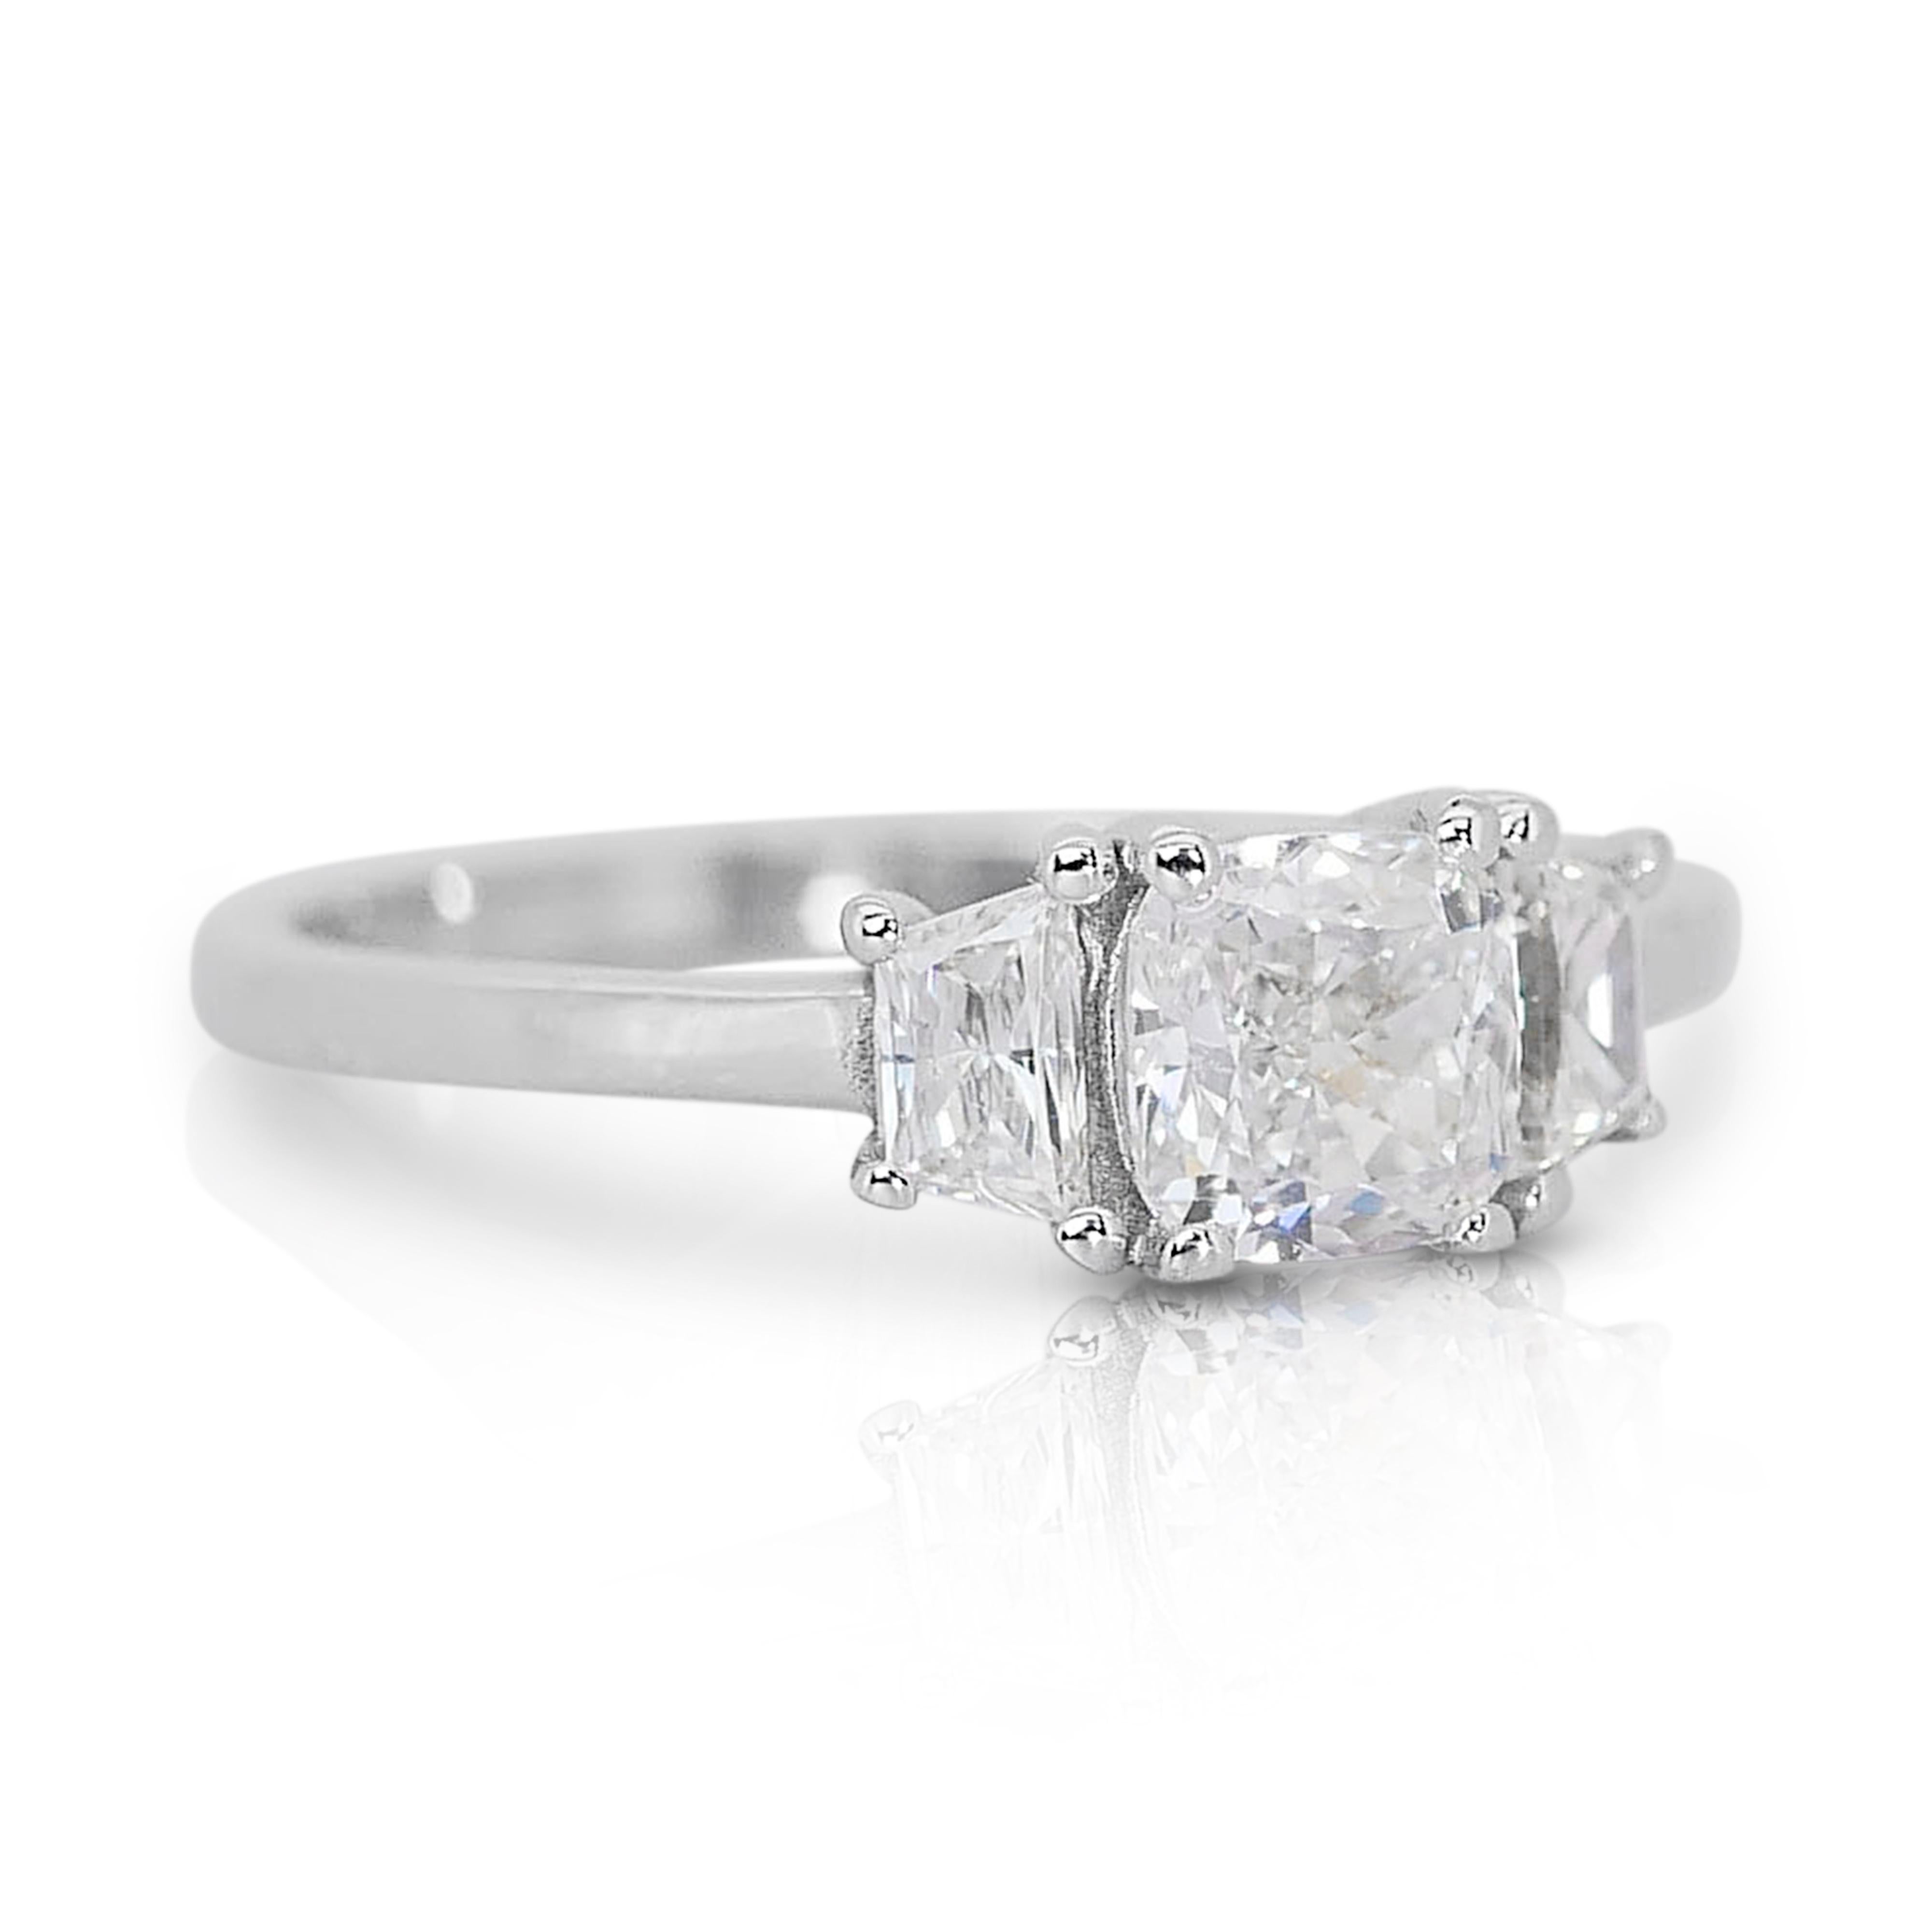 At the heart of this exquisite ring lies a brilliant 0.90-carat Cushion Modified Brilliant diamond, boasting a radiant G color and mesmerizing VS2 clarity. Its expertly cut facets enhance its sparkle, creating a captivating display of light with